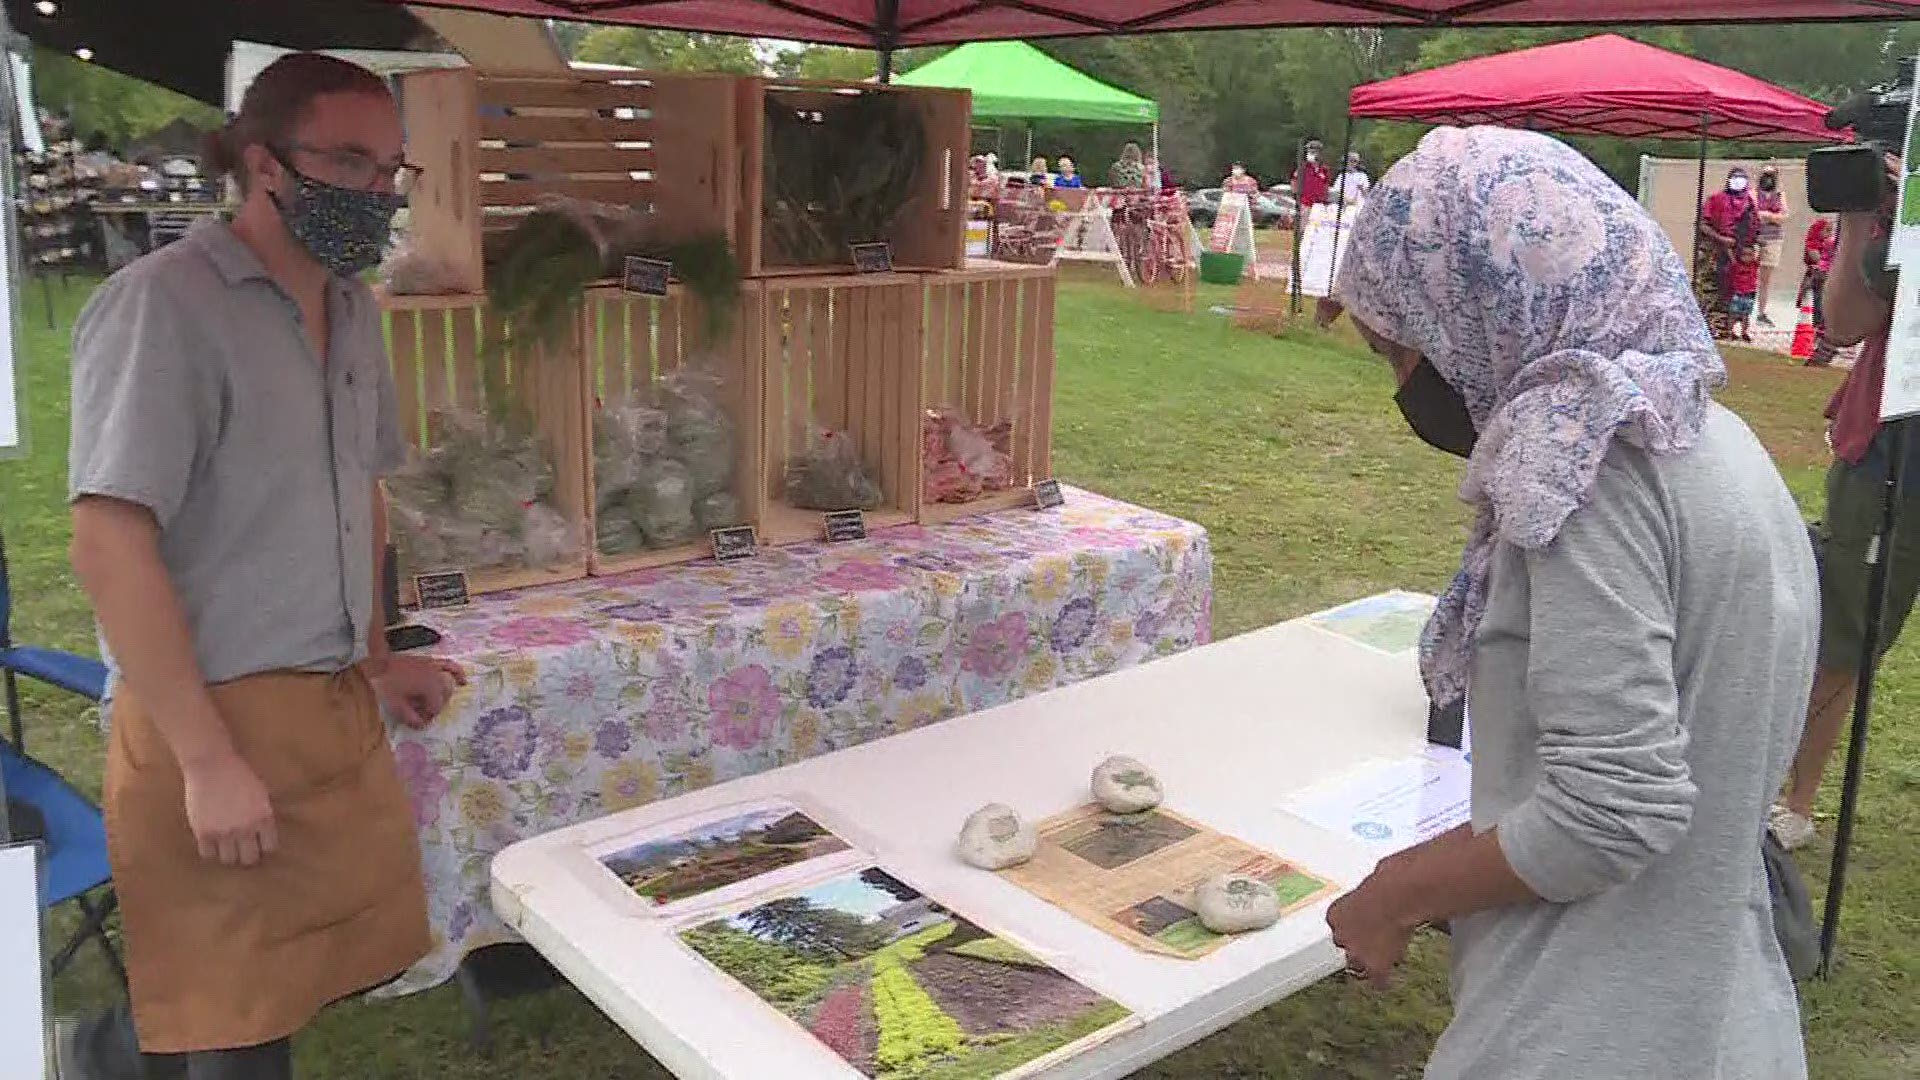 As Election Day approached both Rep. Ilhan Omar and top rival 5th District rival Antone Melton-Meaux hit the same farmers market in Richfield, but at different times